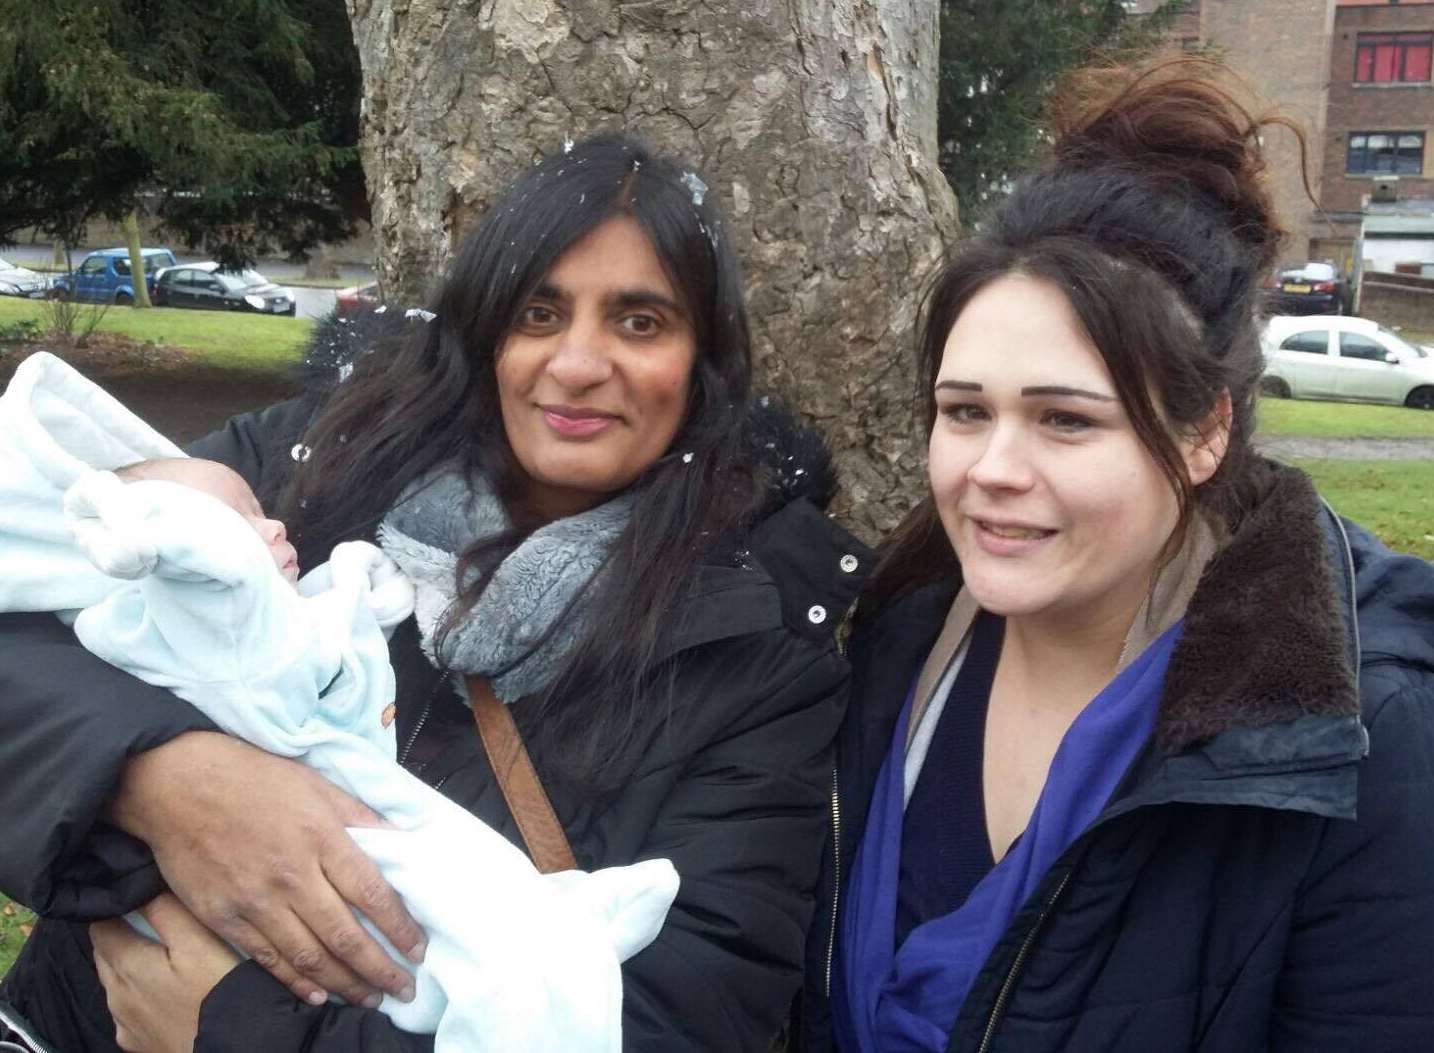 Anne and Priti with baby Alfie.